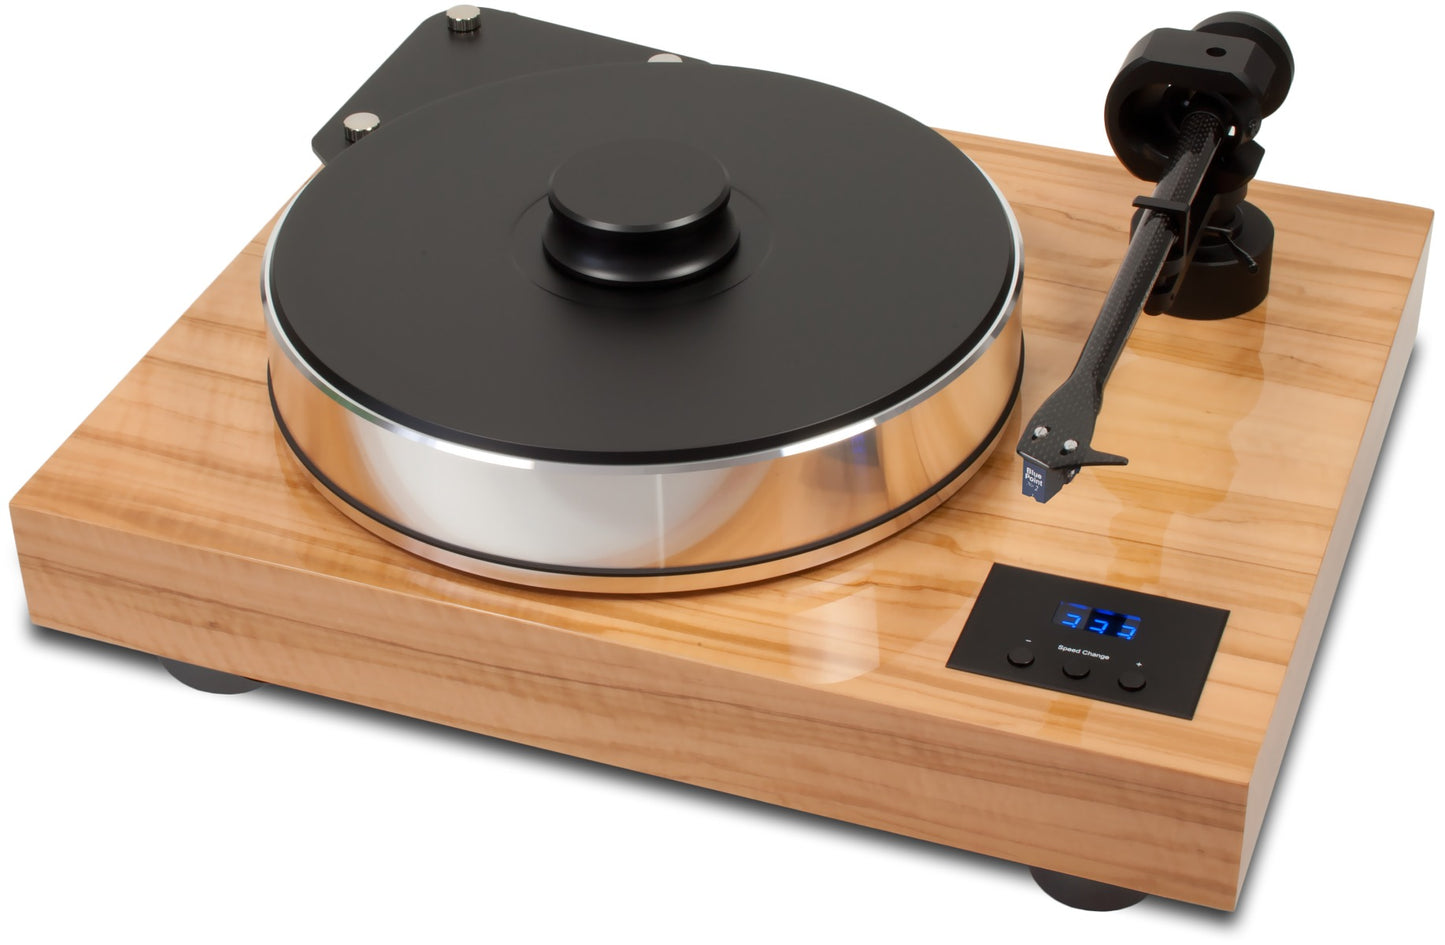 Pro-Ject Xtension 10 Turntable